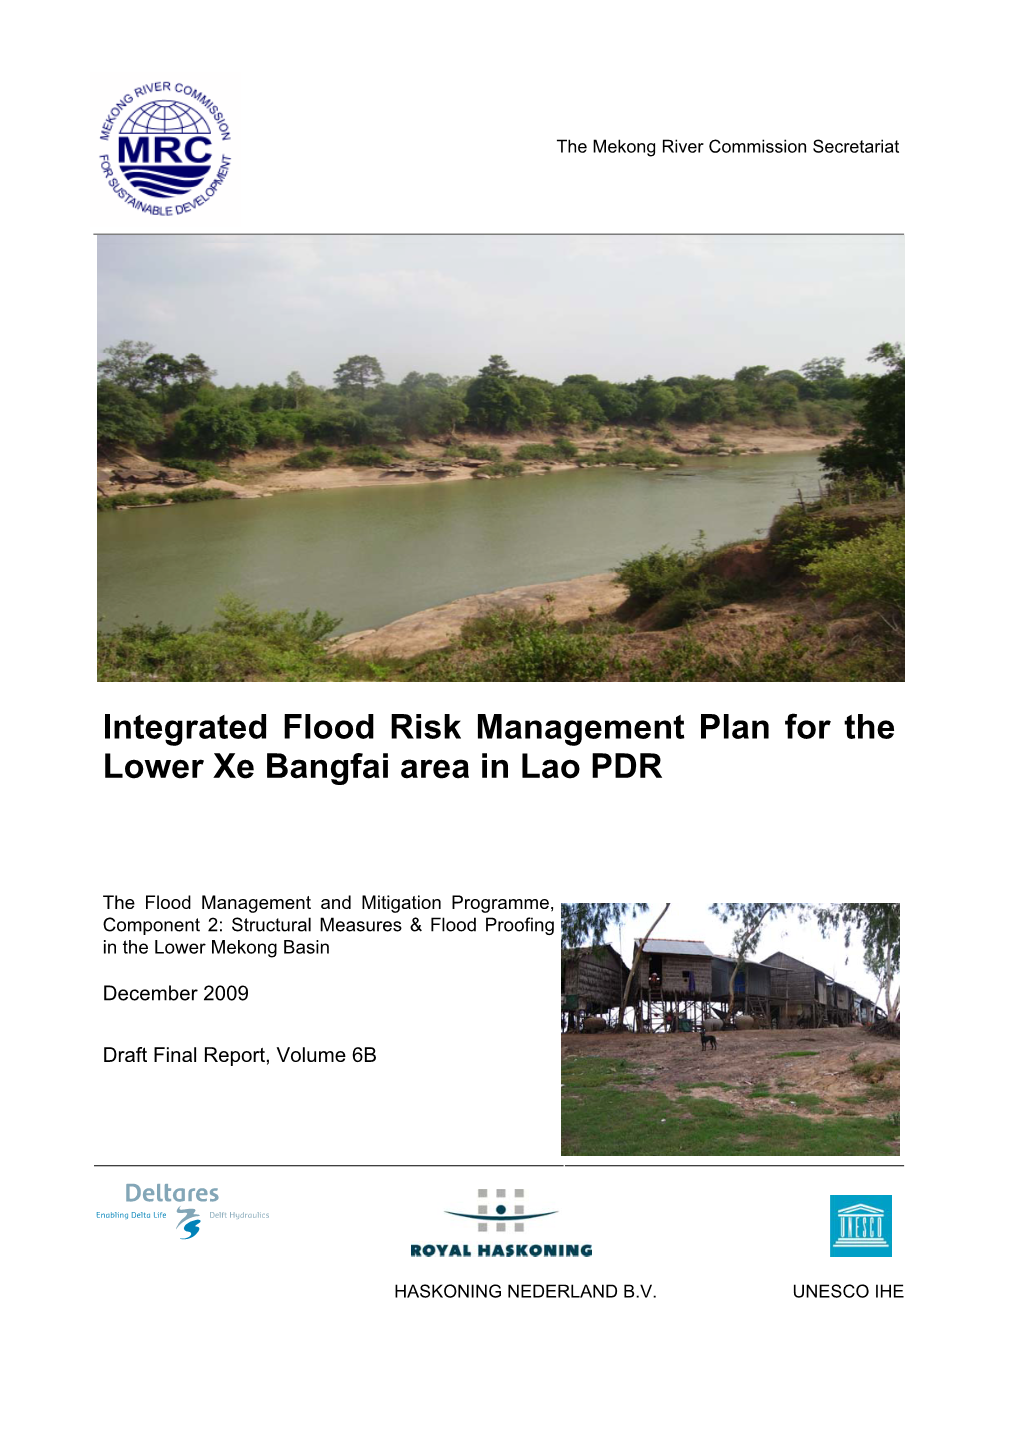 Integrated Flood Risk Management Plan for the Lower Xe Bangfai Area in Lao PDR